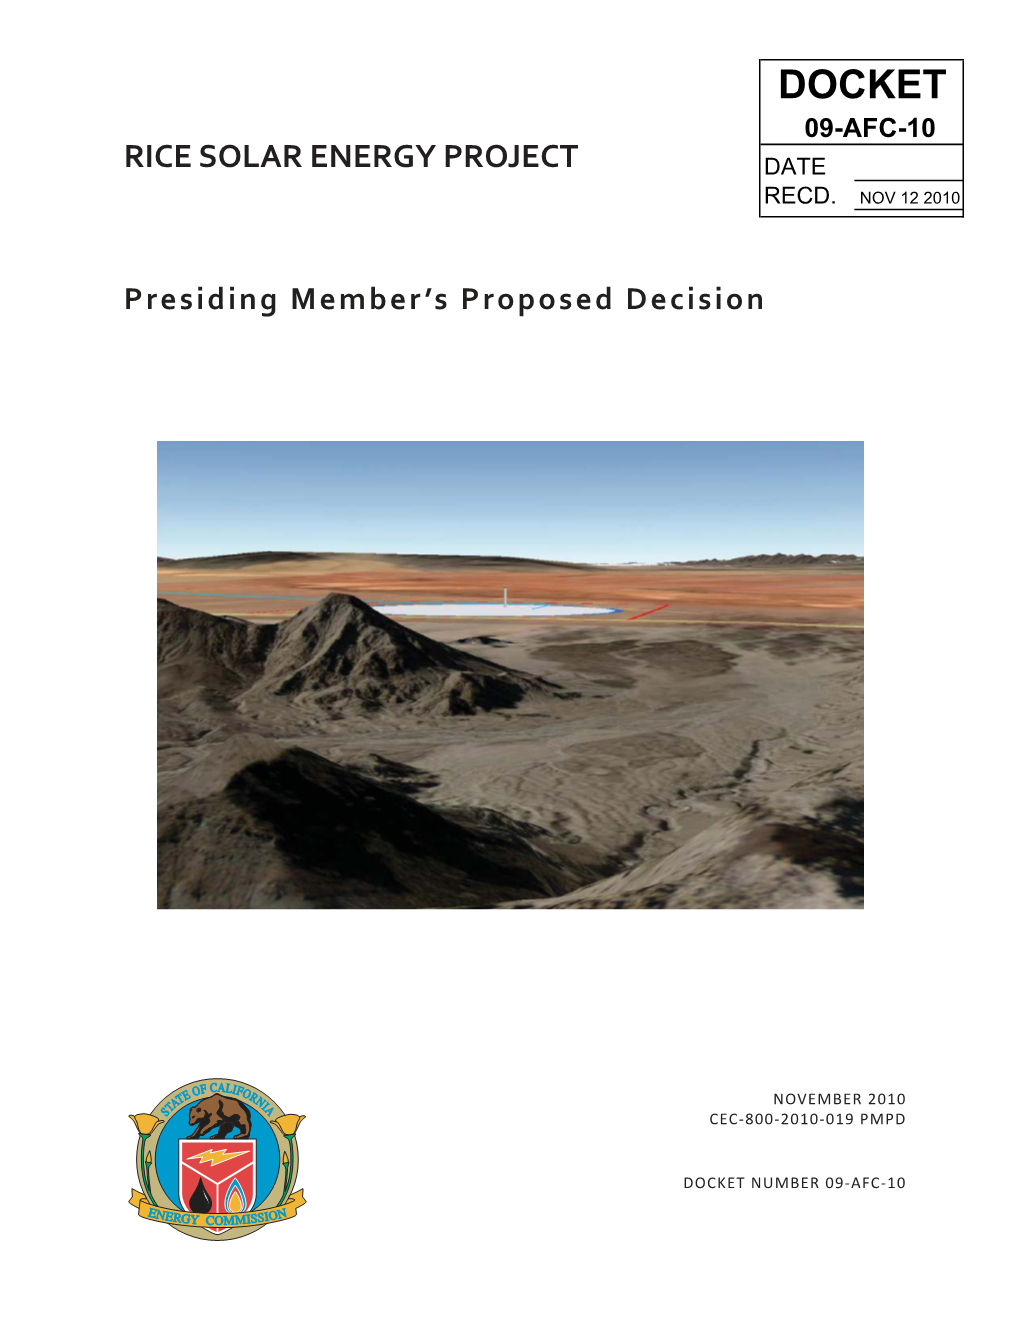 Presiding Member's Proposed Decision for the RICE SOLAR ENERGY POWER PLANT PROJECT (Docket Number 09-AFC-10)